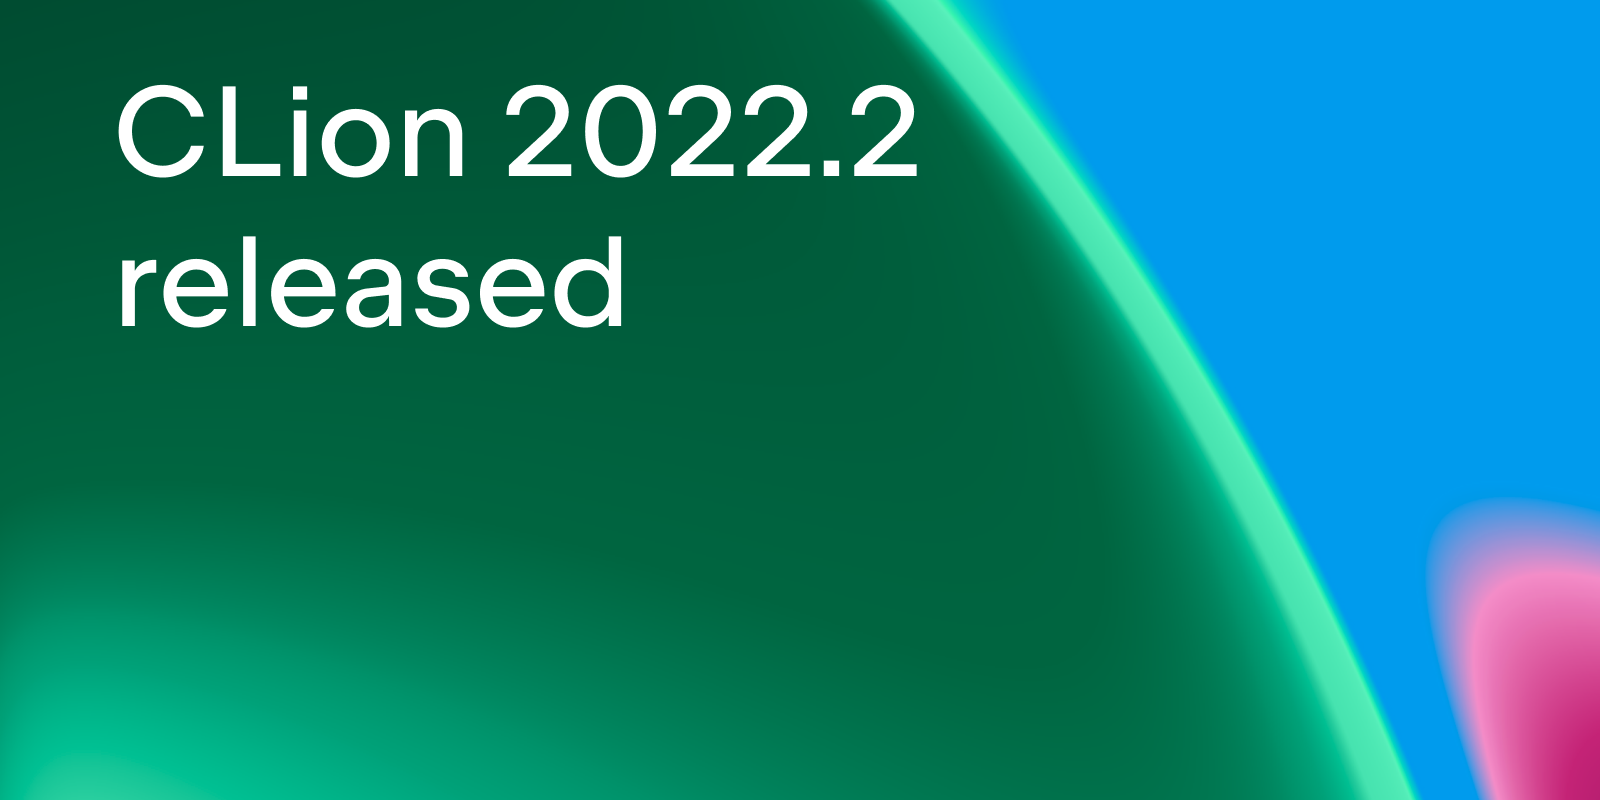 CLion 2022.2 Released